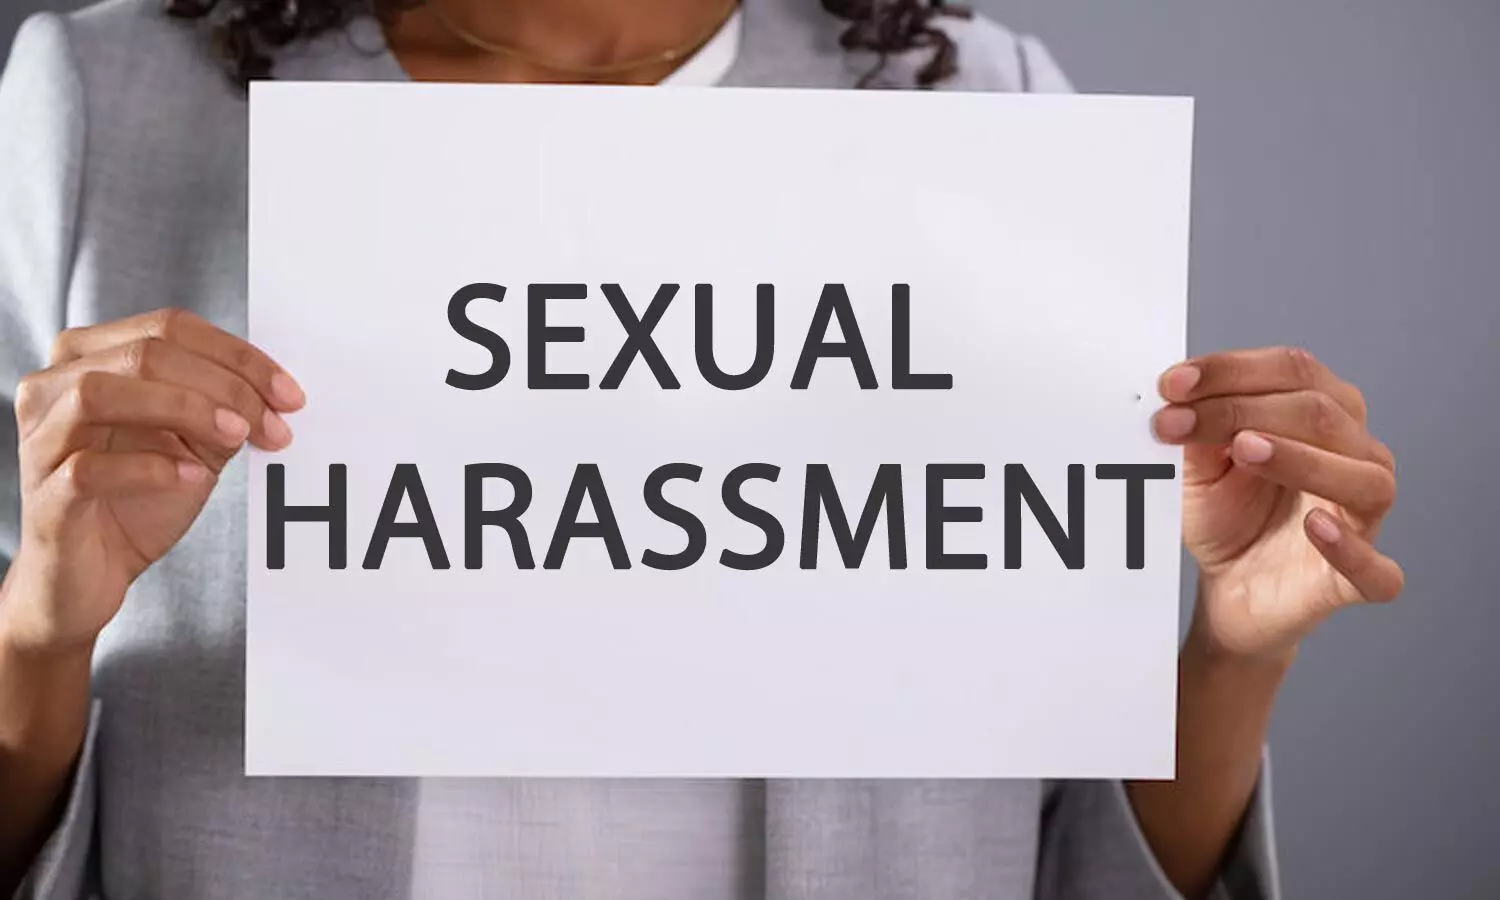 Telangana: District Medical Officer booked in Sexual harassment case after lady doctor files complaint